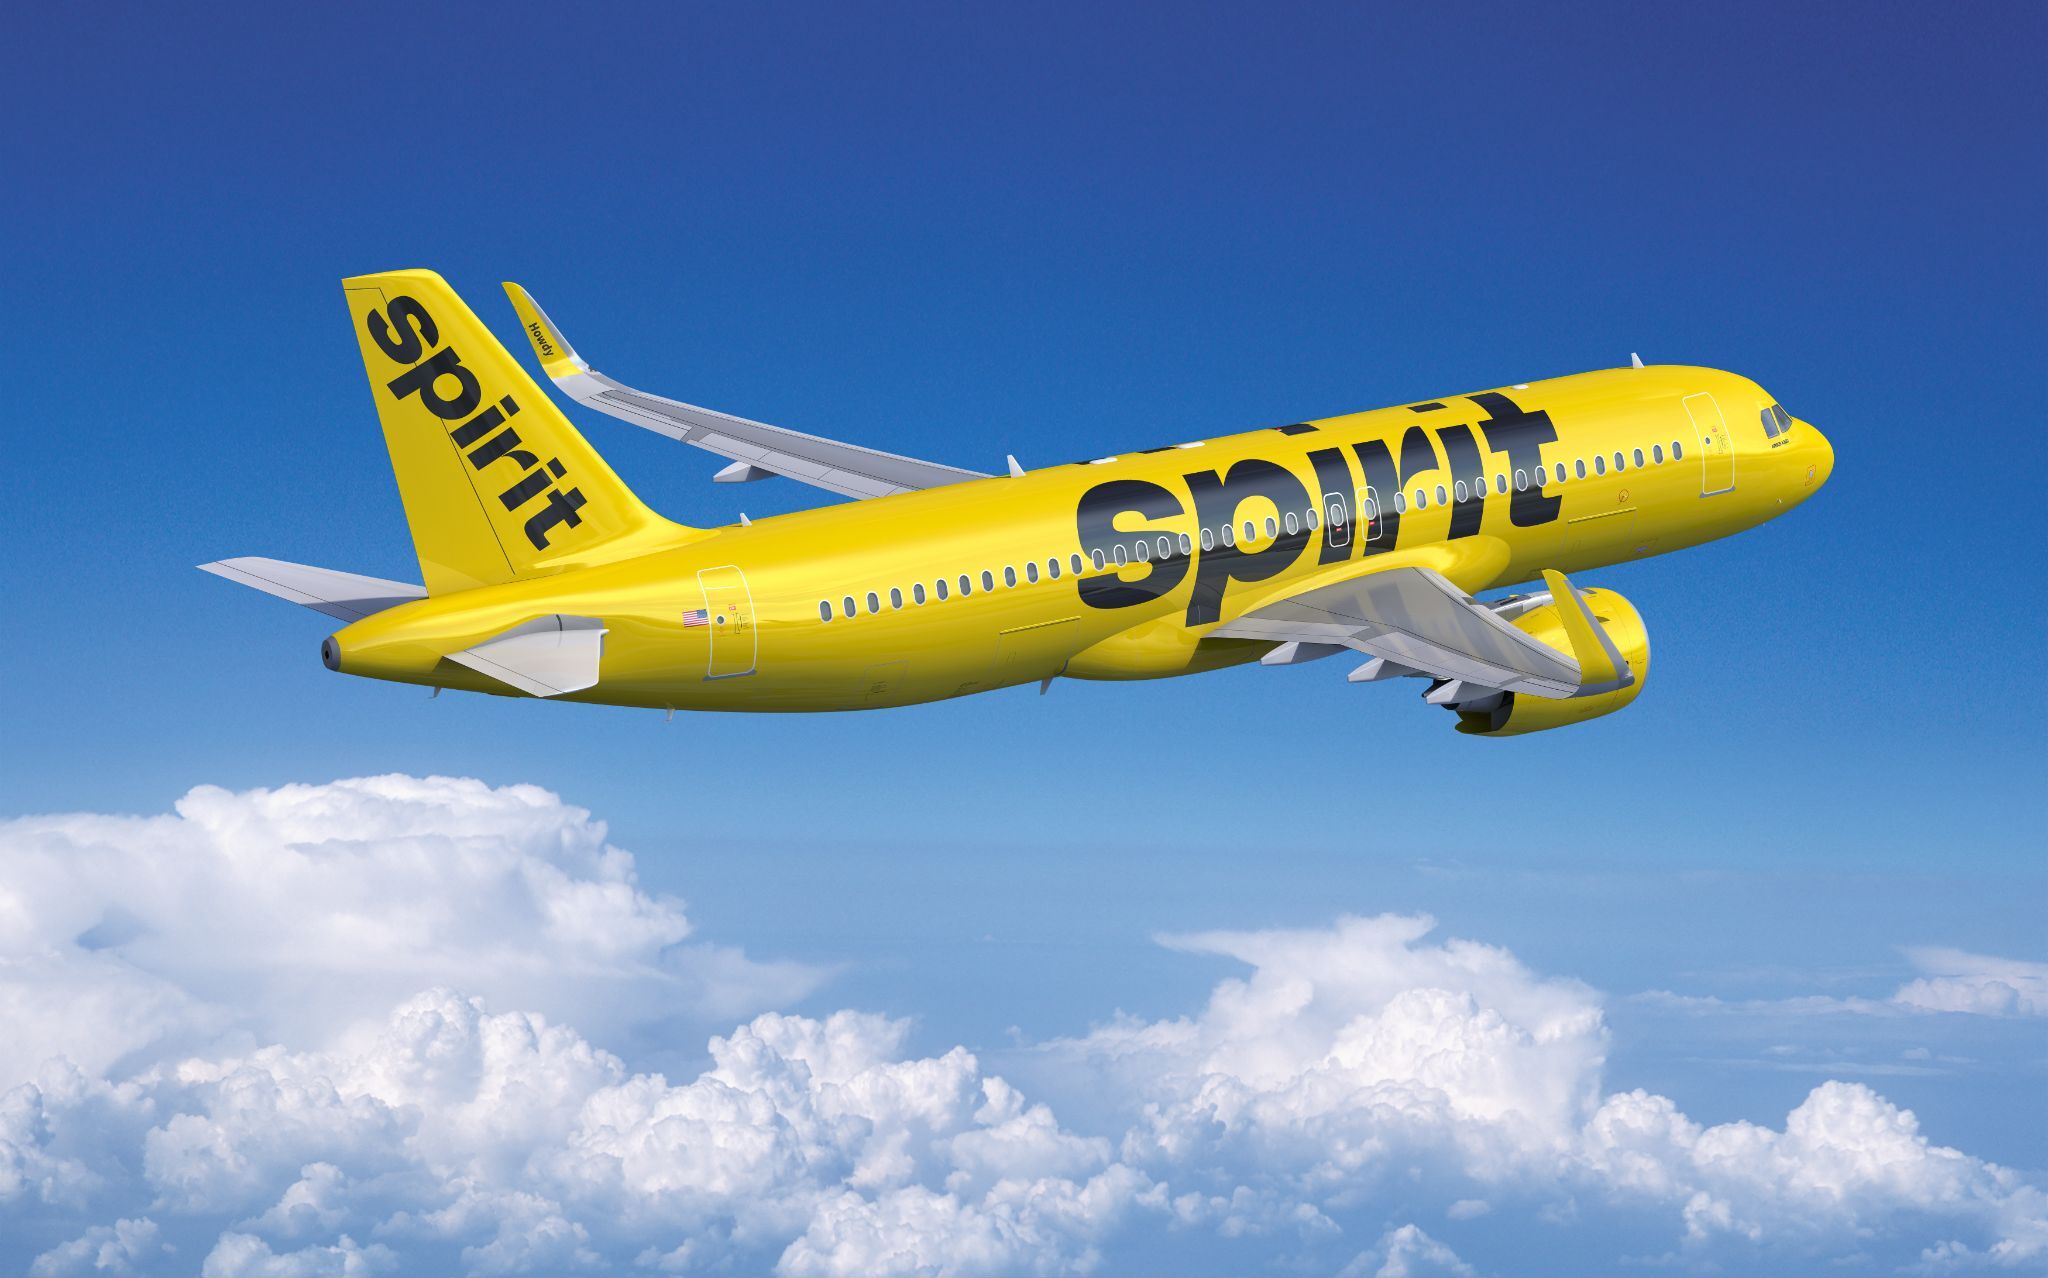 Turbulence Over the Caribbean: Spirit Airlines Flight's Water Landing Scare